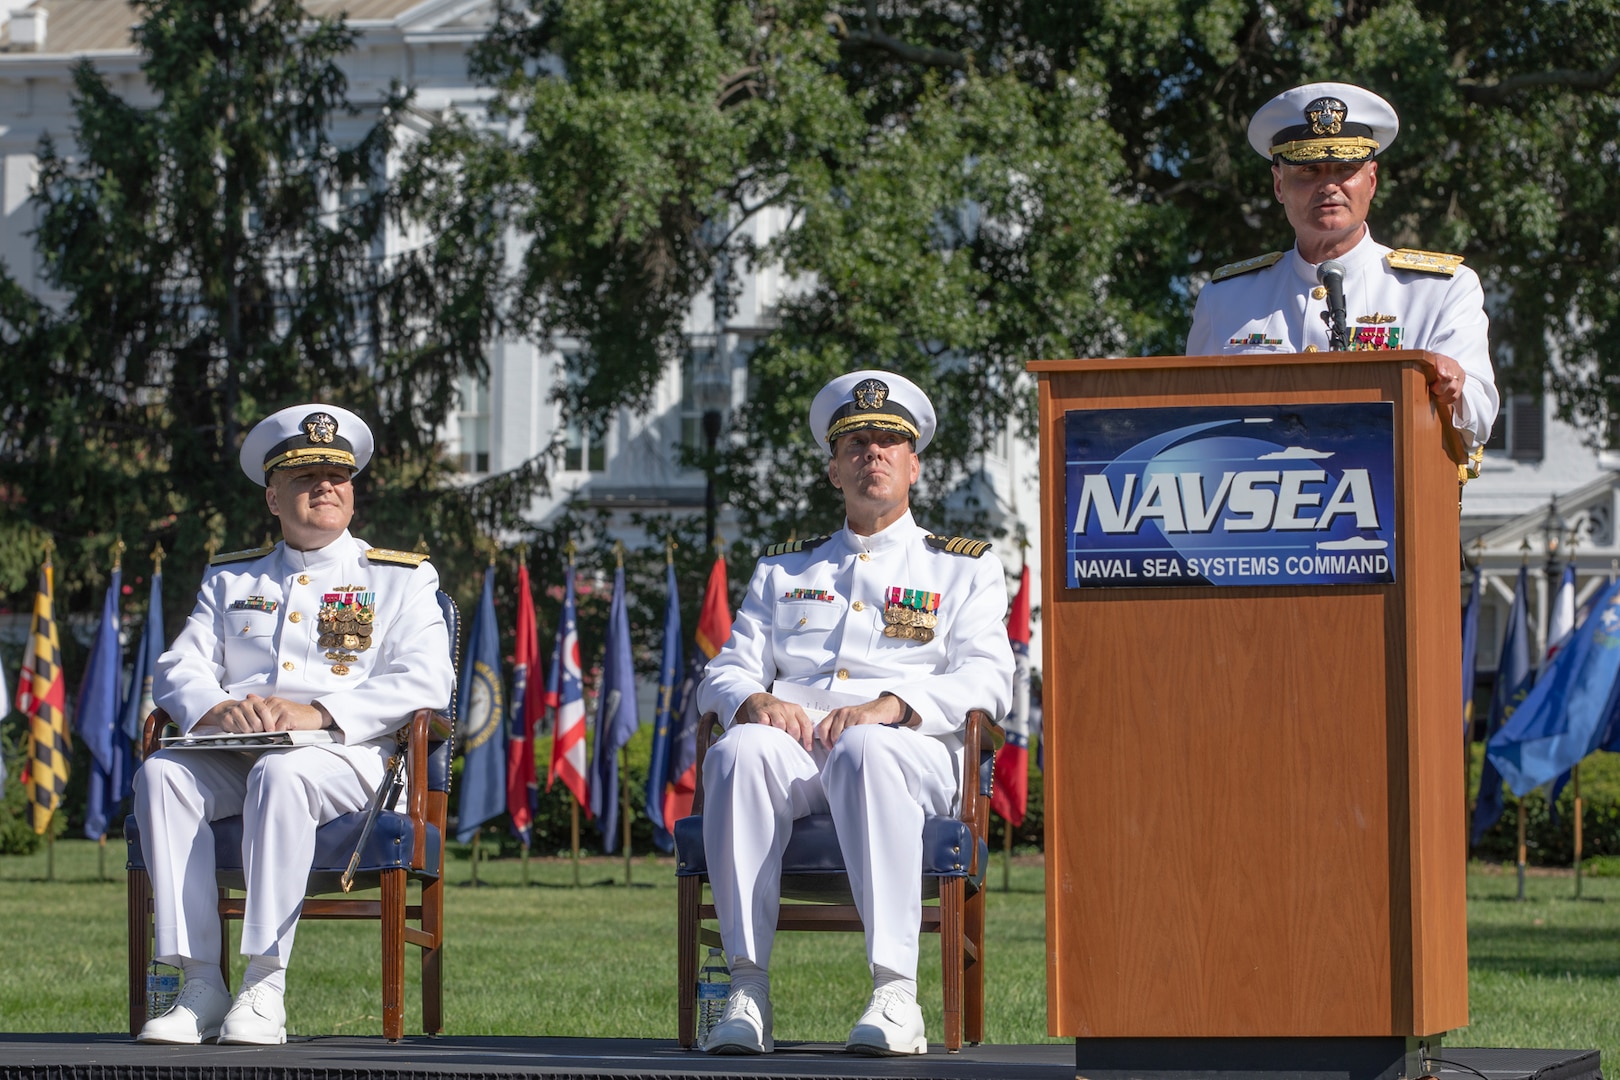 Rear Adm. Thomas J. Anderson relieved Vice Adm. William J. Galinis as (acting) Commander, Naval Sea Systems Command